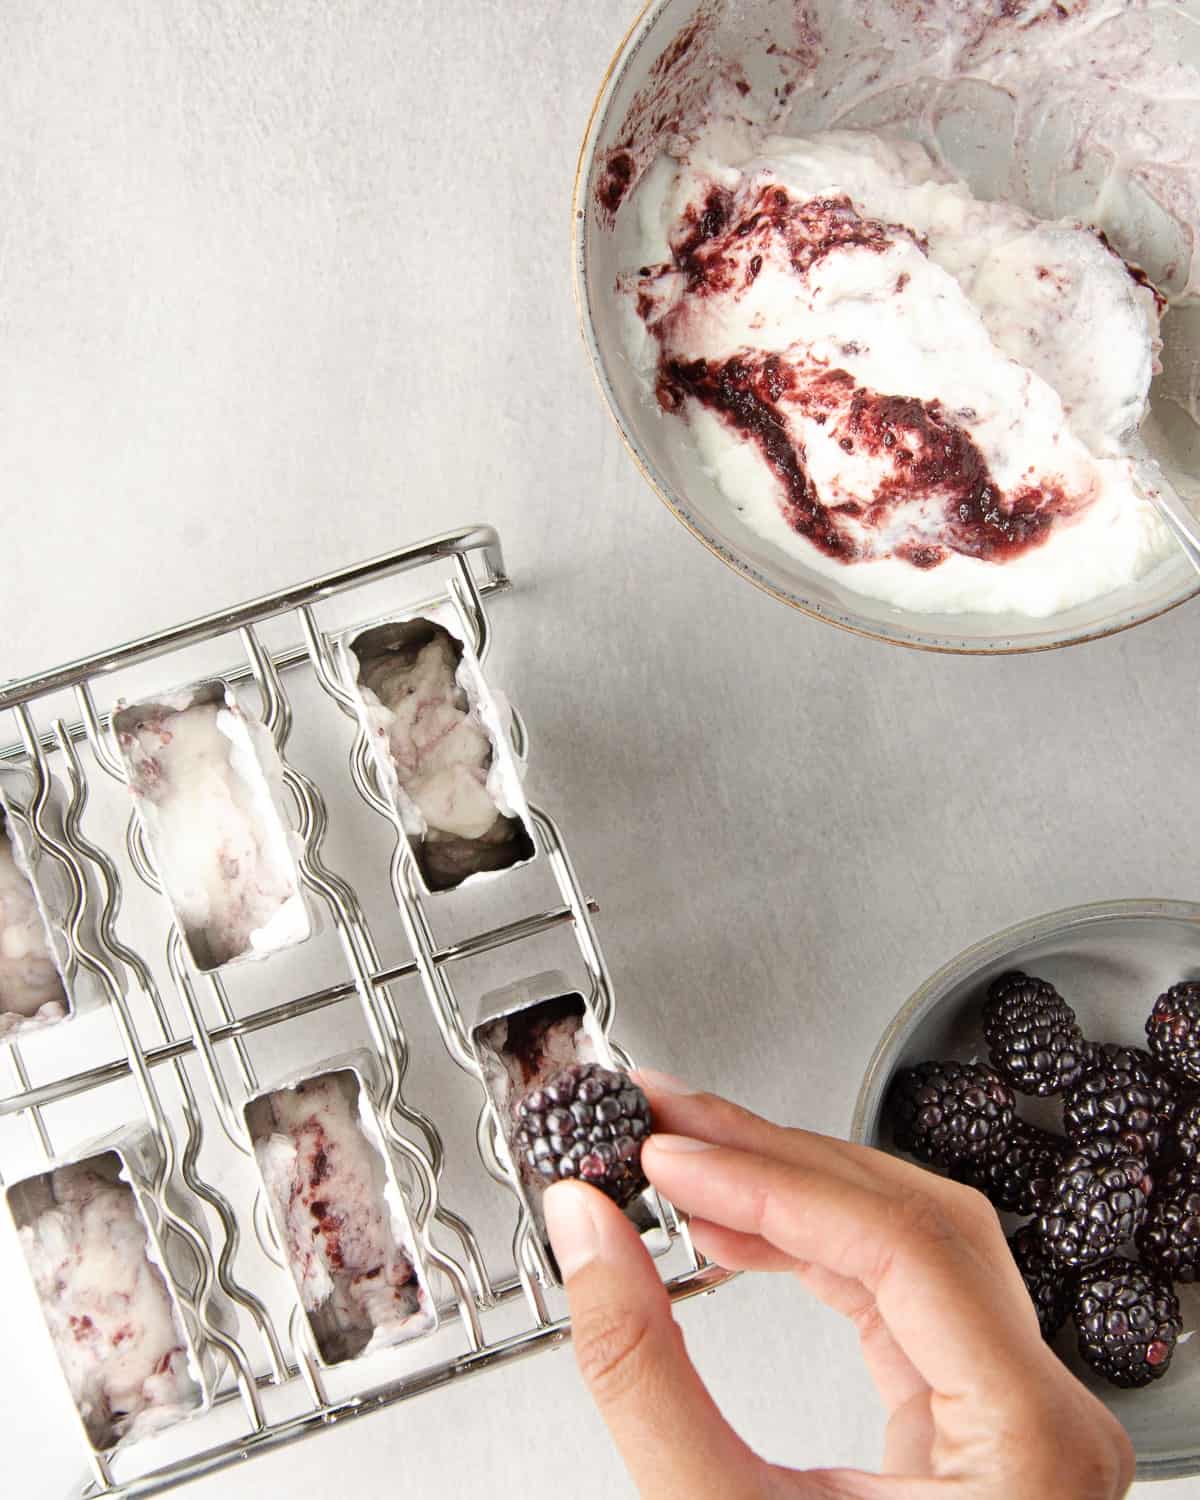 placing a blackberry into half filled popsicle molds. a half-empty bowl of greek yogurt lightly marbled with blackberry jam